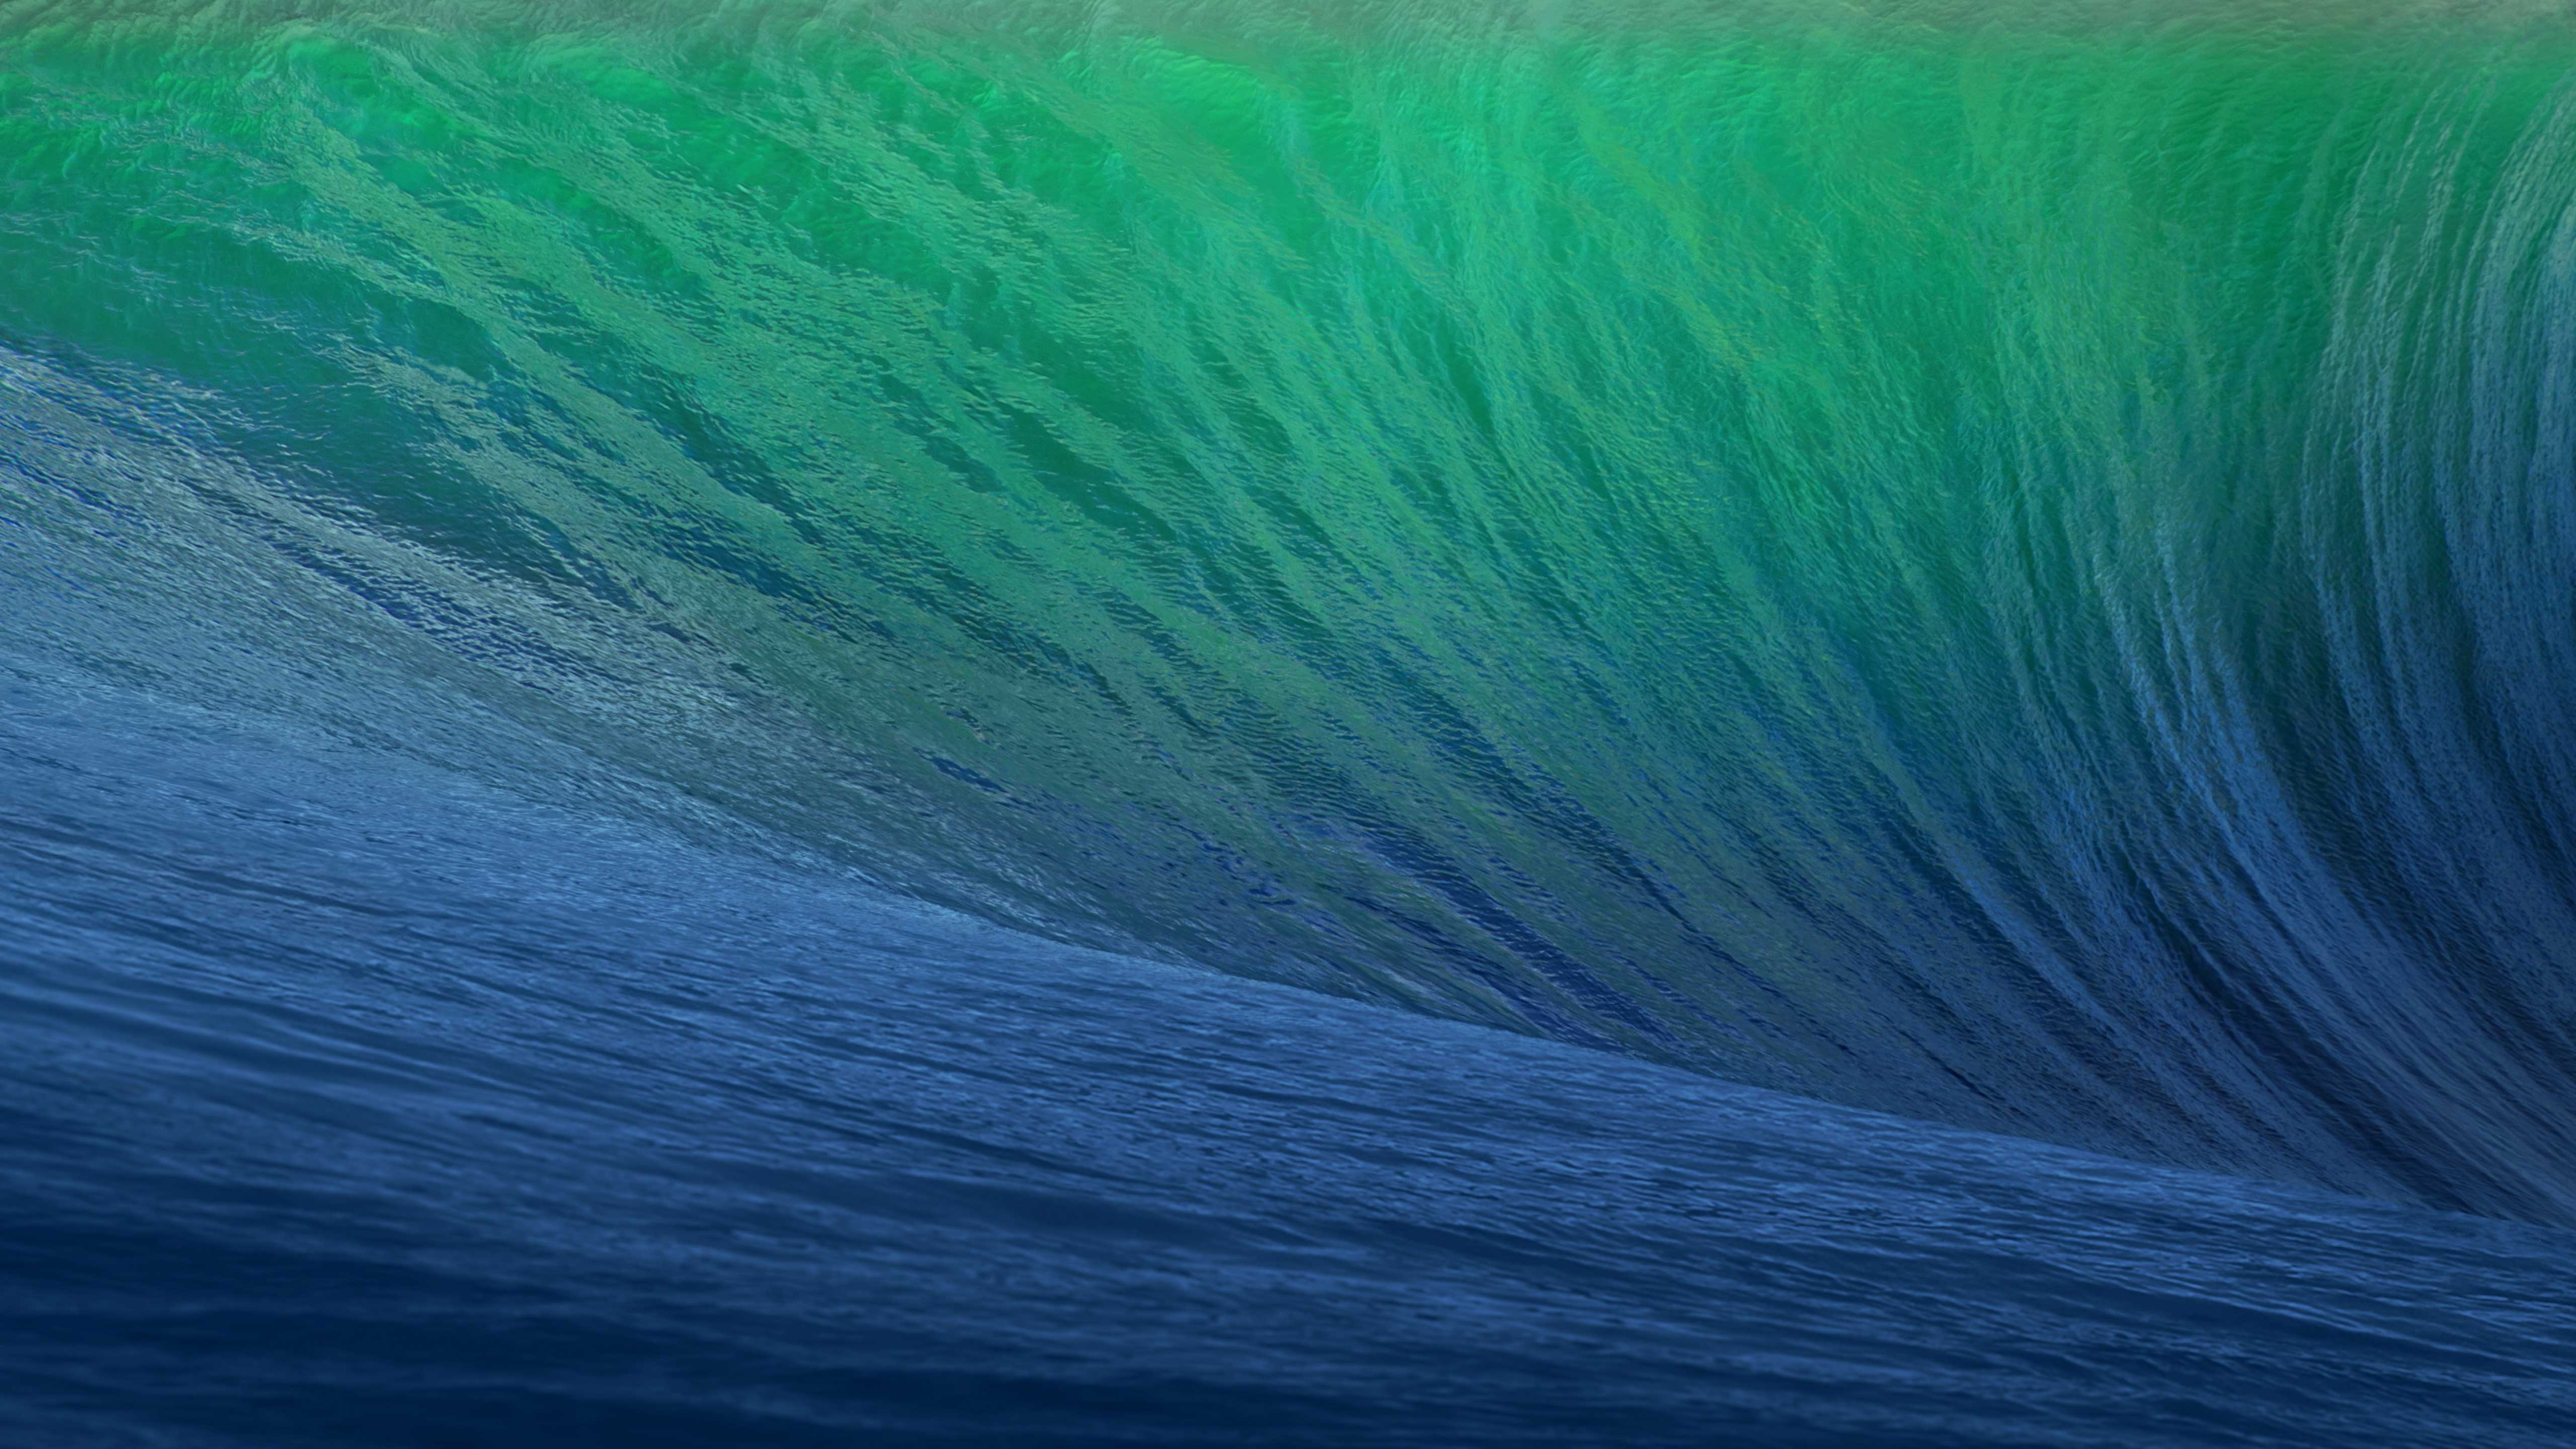 Gallery for - apple imac wallpapers